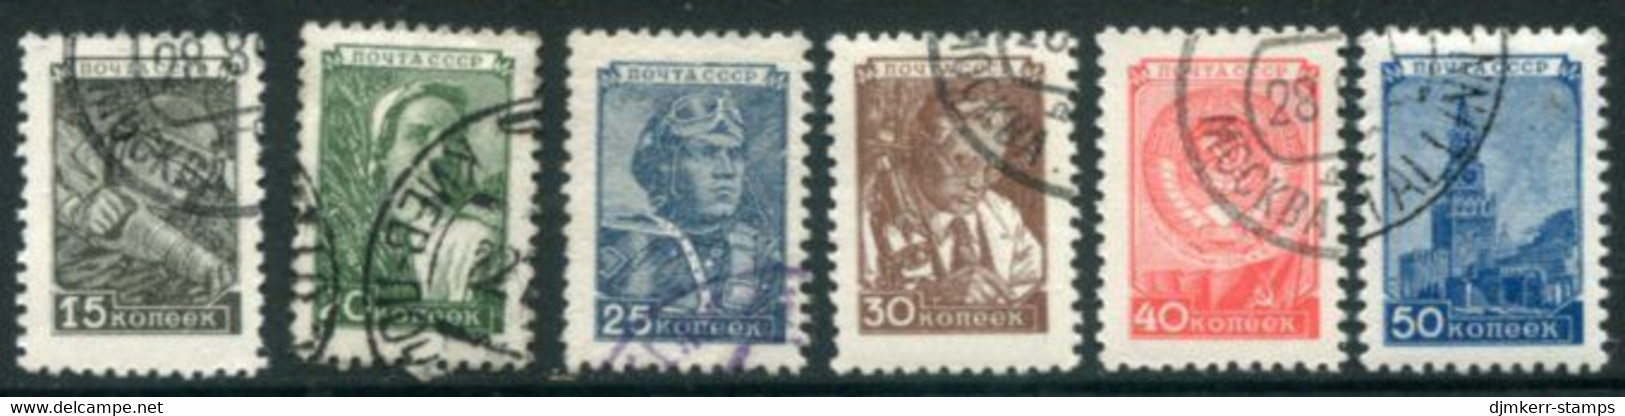 SOVIET UNION 1949 Definitive (cheapest Types) Used.  Michel 1331-36 I - Usados